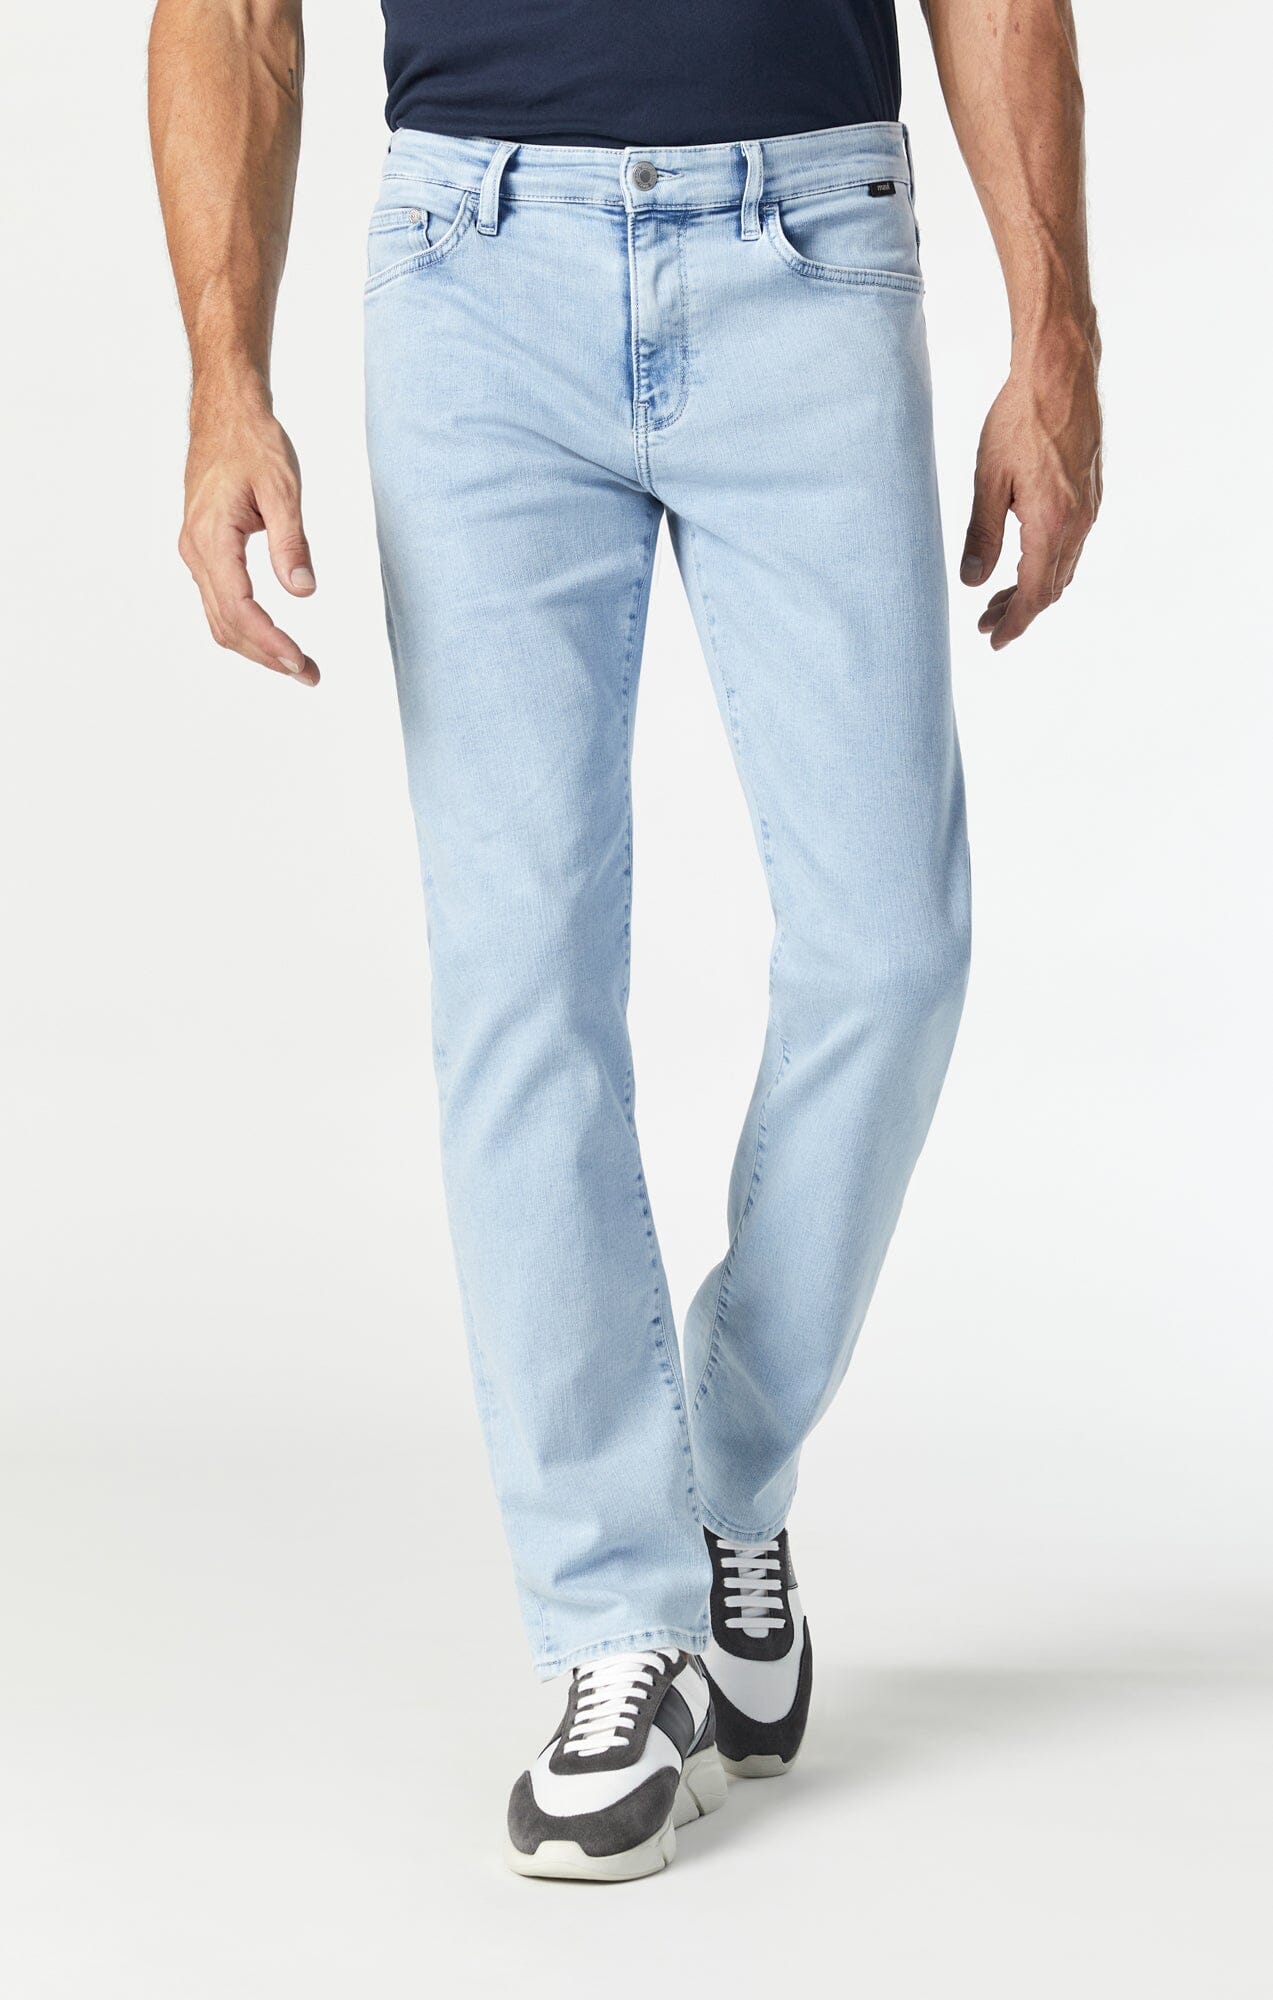 Men's Straight Jeans, Straight Fit Jeans For Men